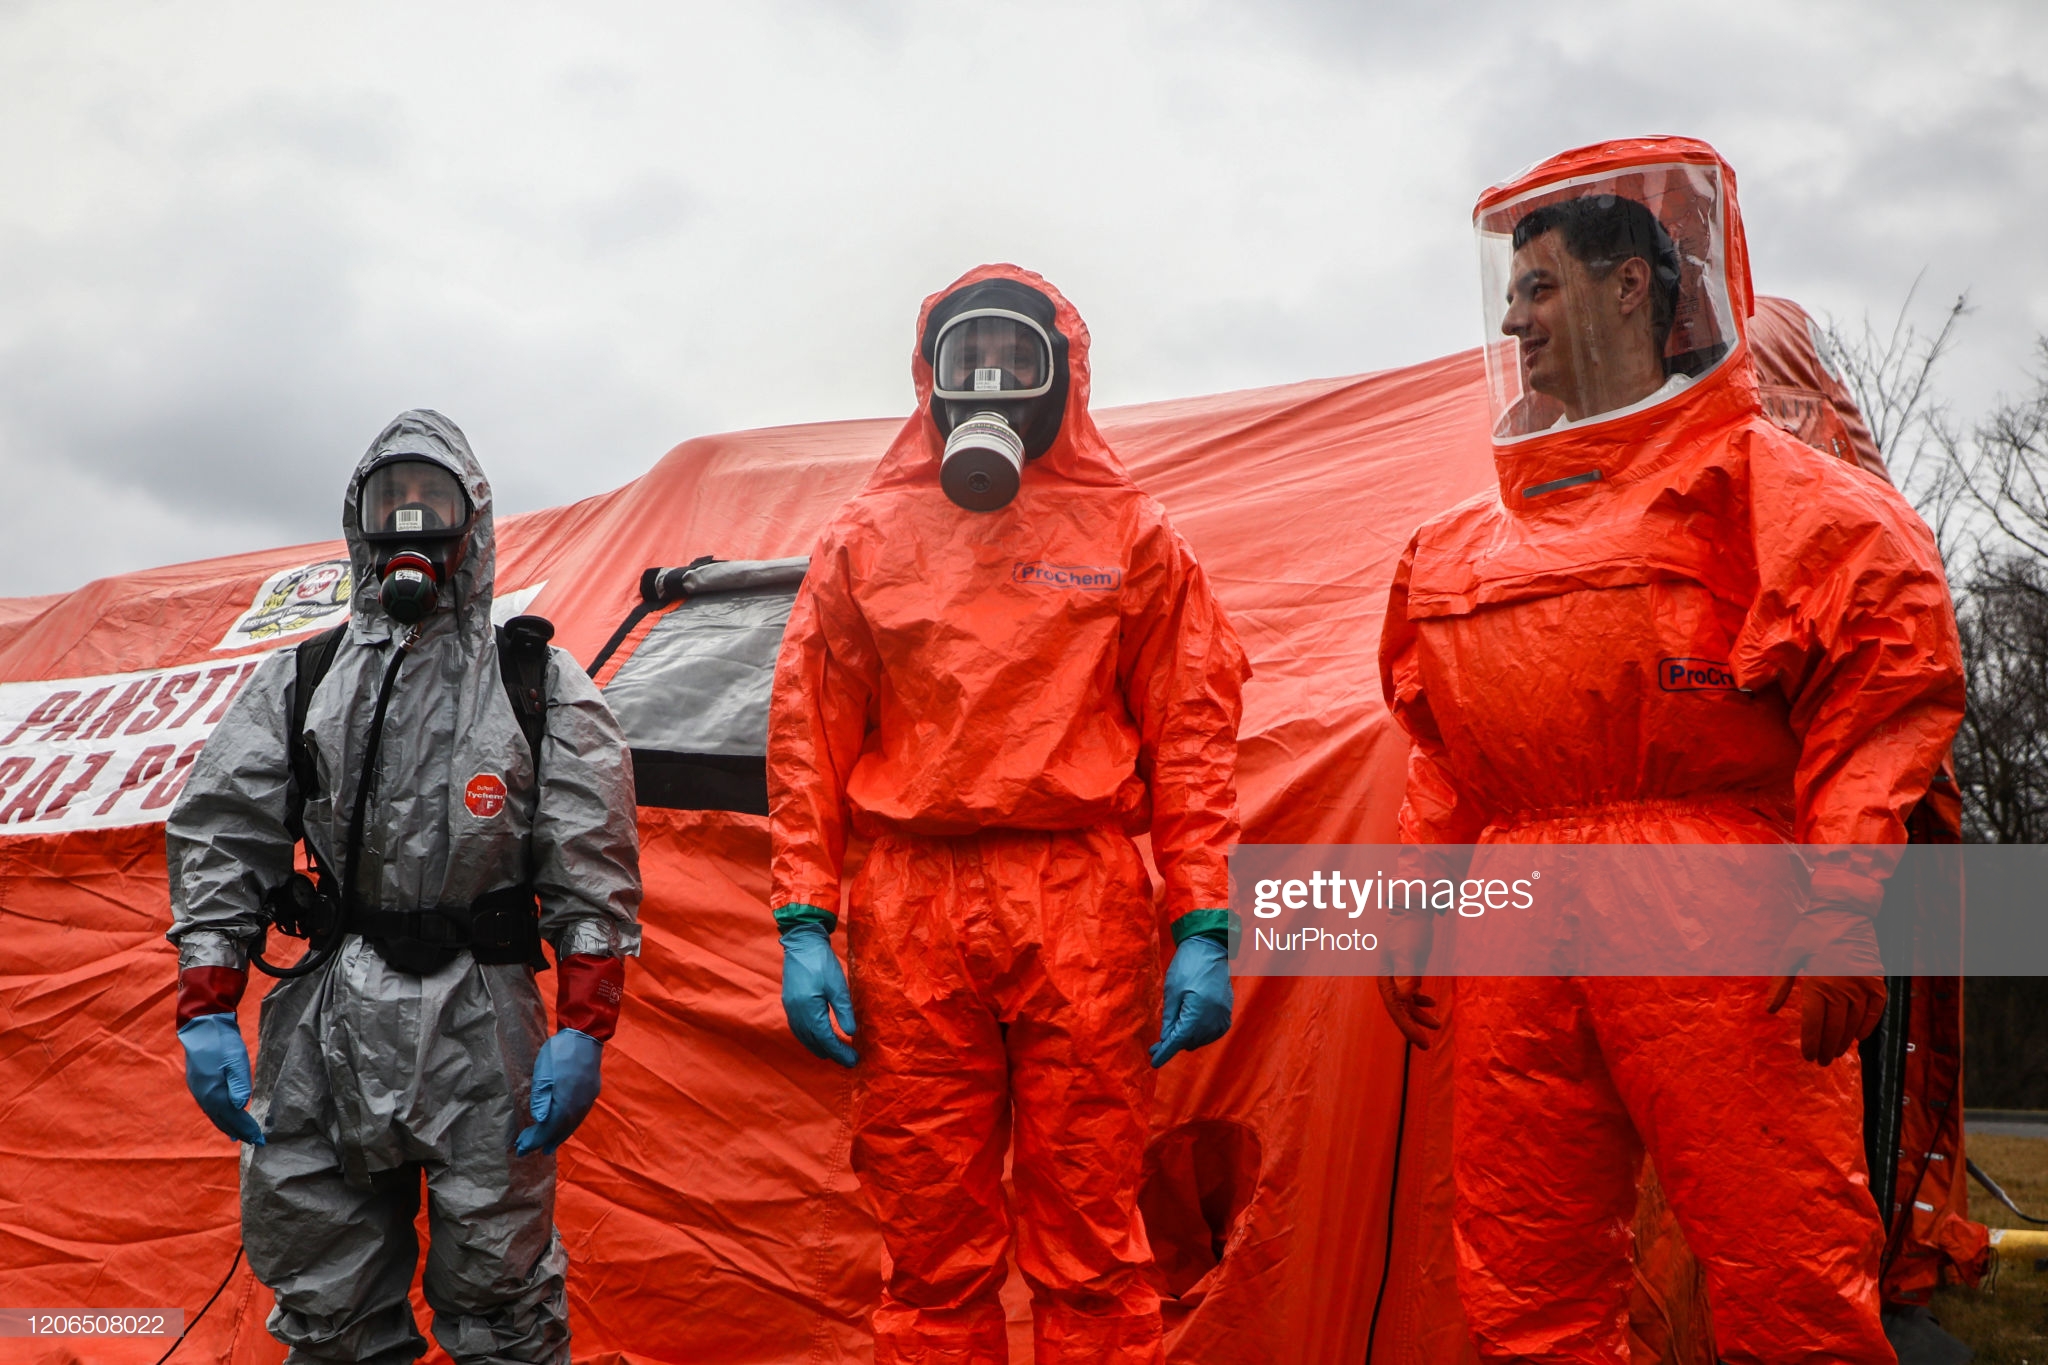 personel-wearing-protective-masks-and-suits-is-pictured-in-front-of-picture-id1206508022